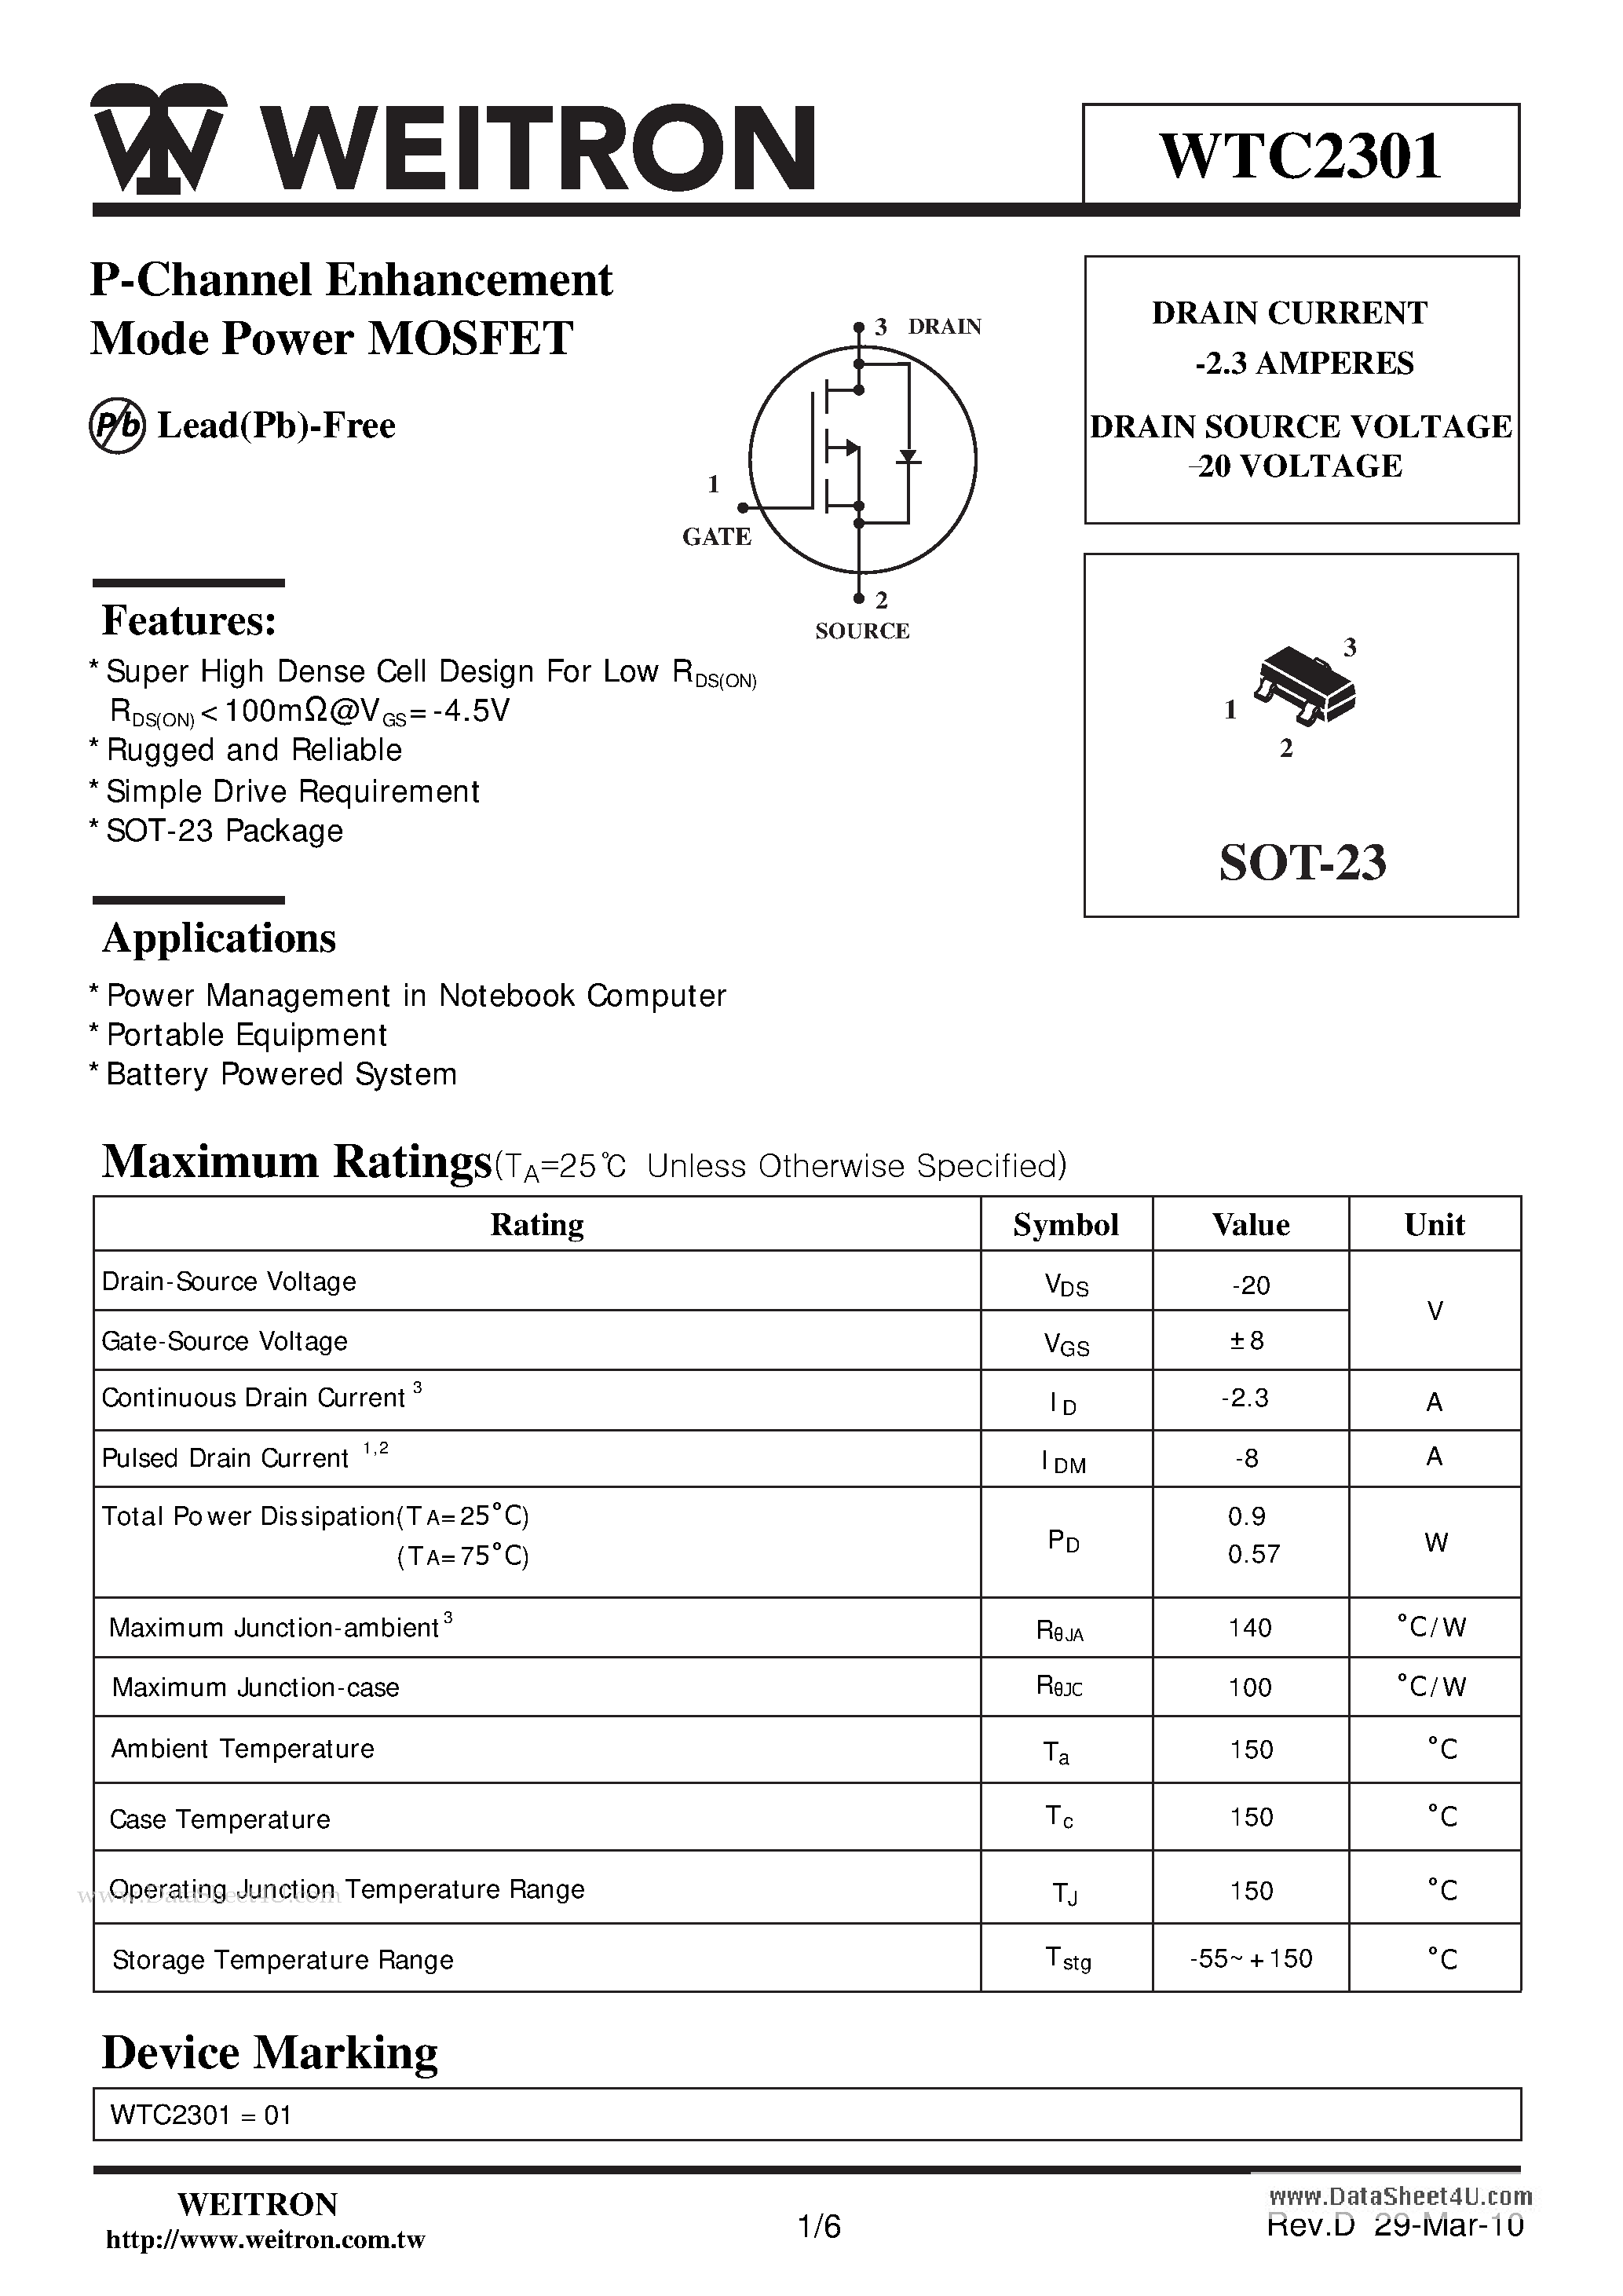 Datasheet WTC2301 - P-Channel Enhancement Mode Power MOSFET page 1